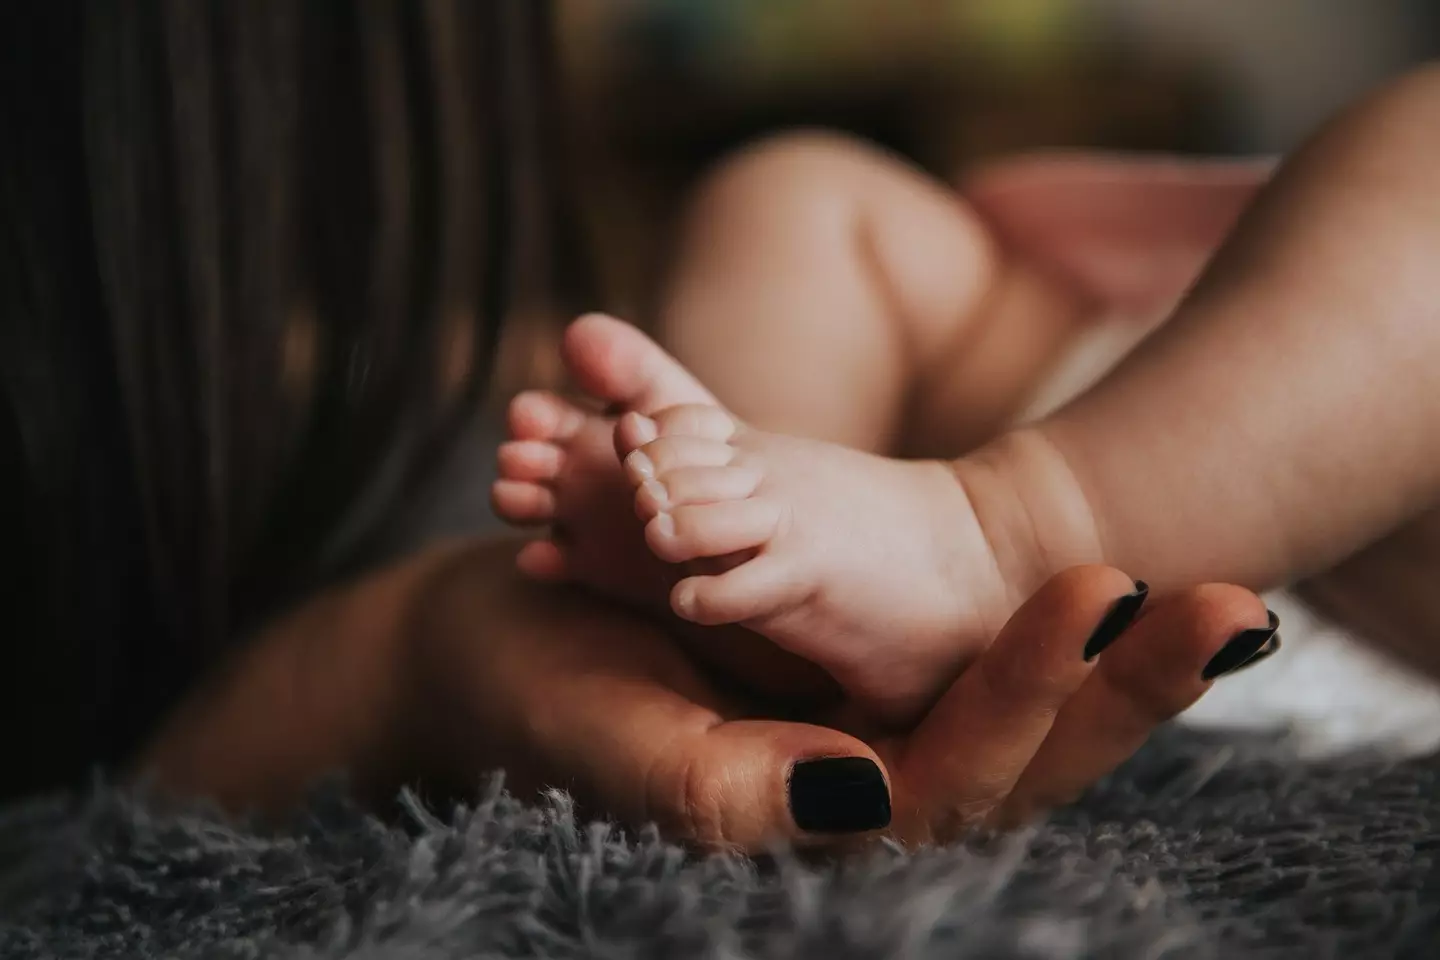 A woman has been praised online after refusing to babysit her new granddaughter for free.